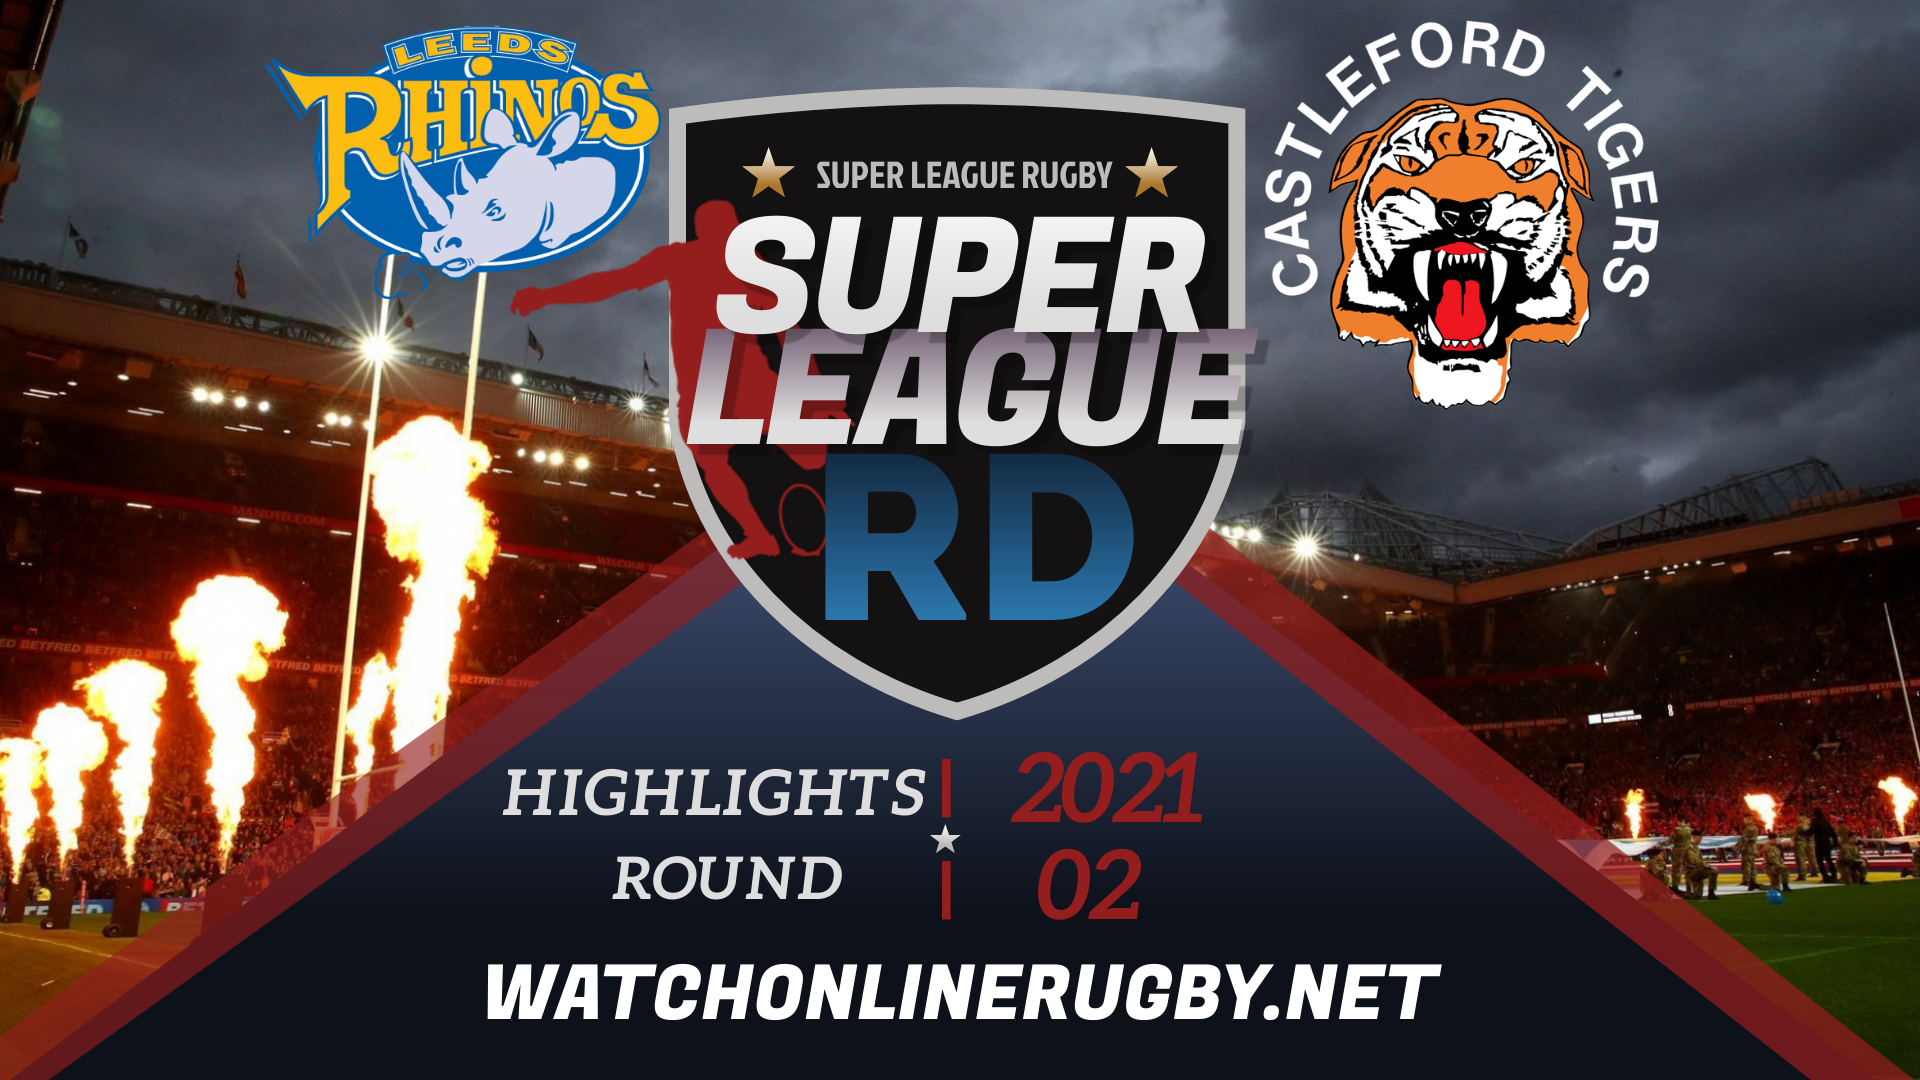 Leeds Rhinos Vs Tigers Super League Rugby 2021 RD 2